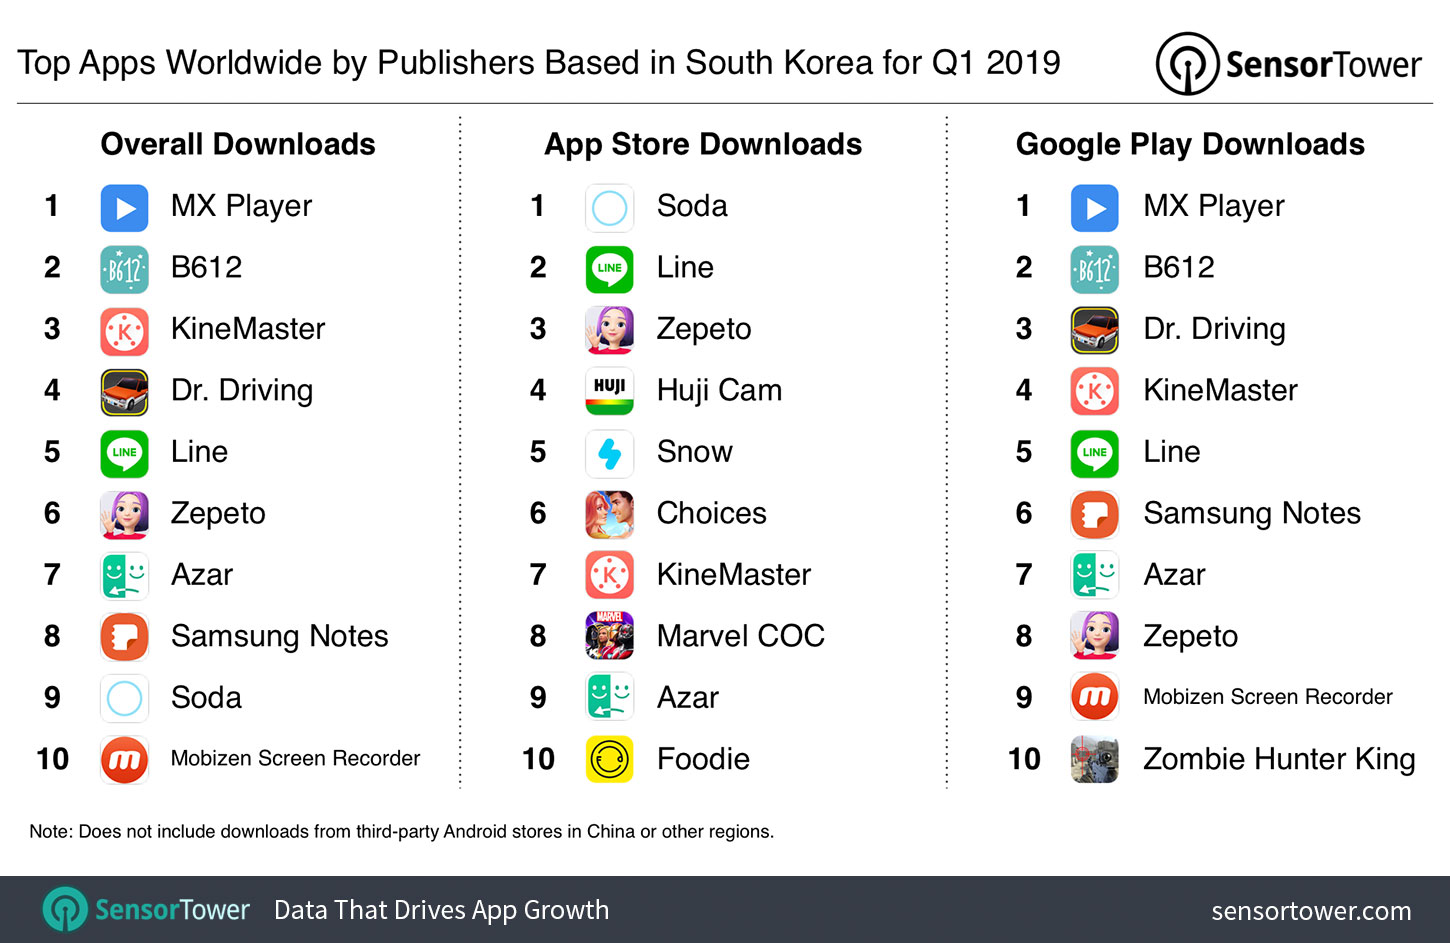 Top Apps Worldwide by Publishers based in South Korea for Q1 2019